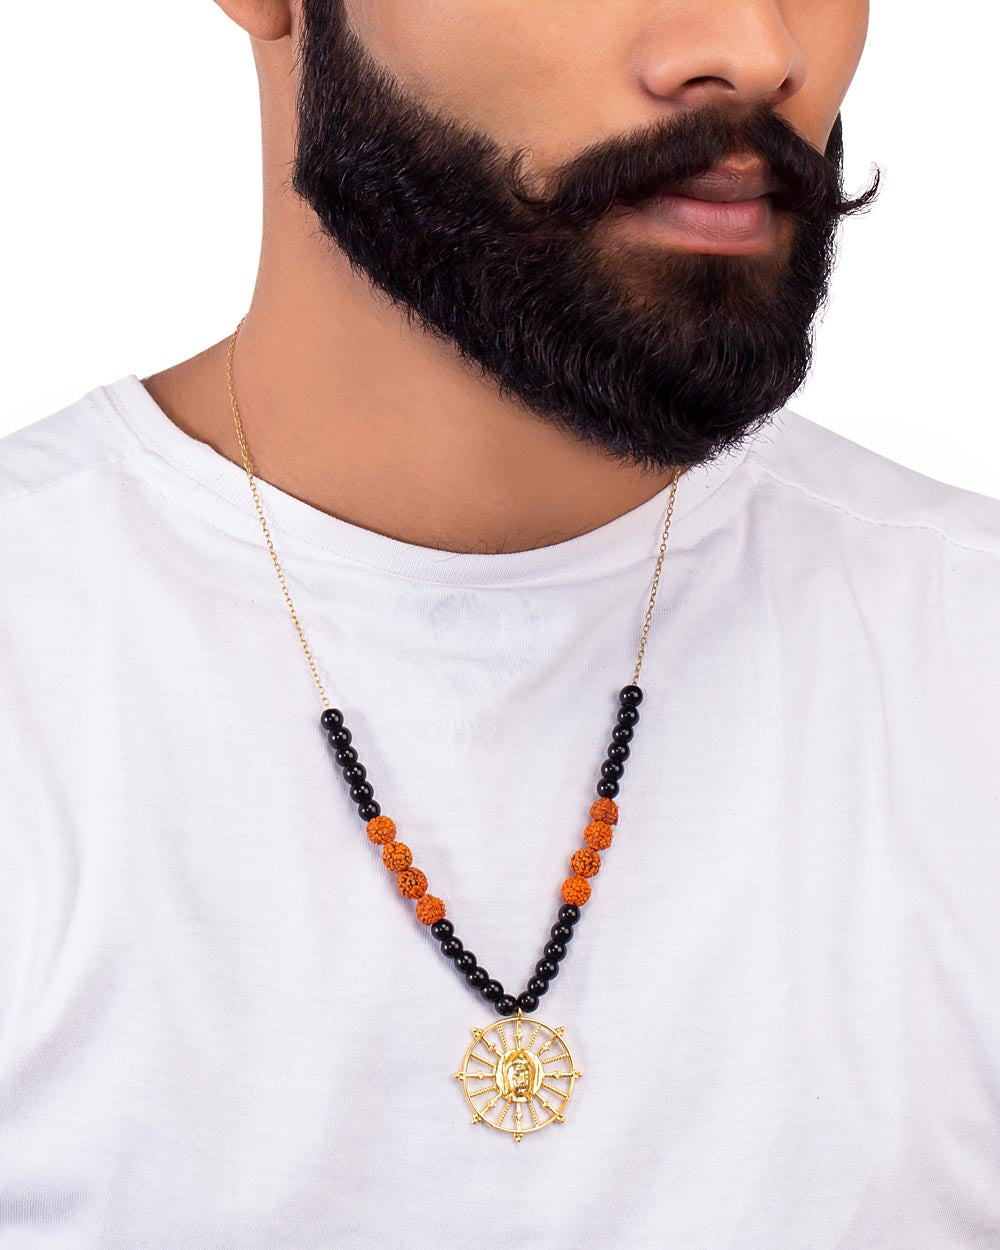 lord buddha inscribed in a chakra designer pendant with rudraksha black beaded chain for men vmjai23048 20190716 11424 1rn7gh2